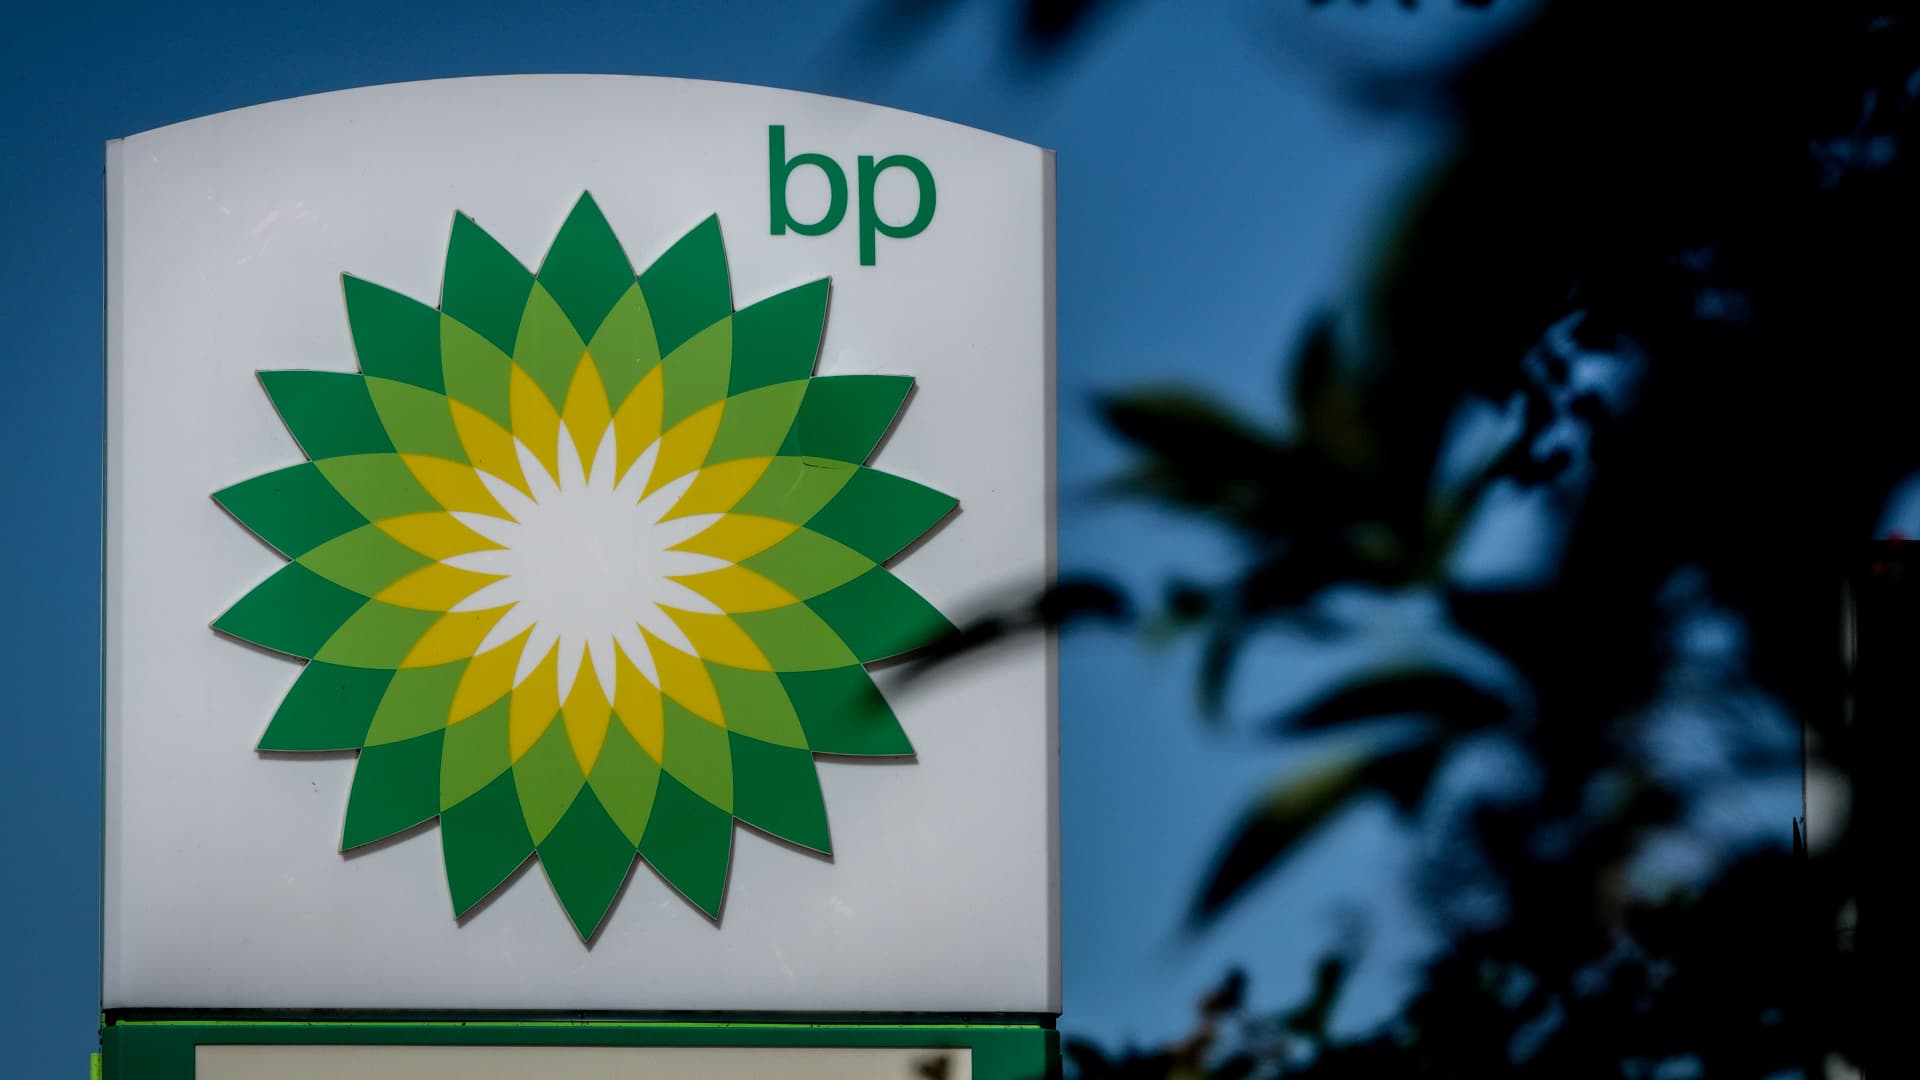 BP expects impairment charge of up to $2 billion in second quarter due to weak refining margins